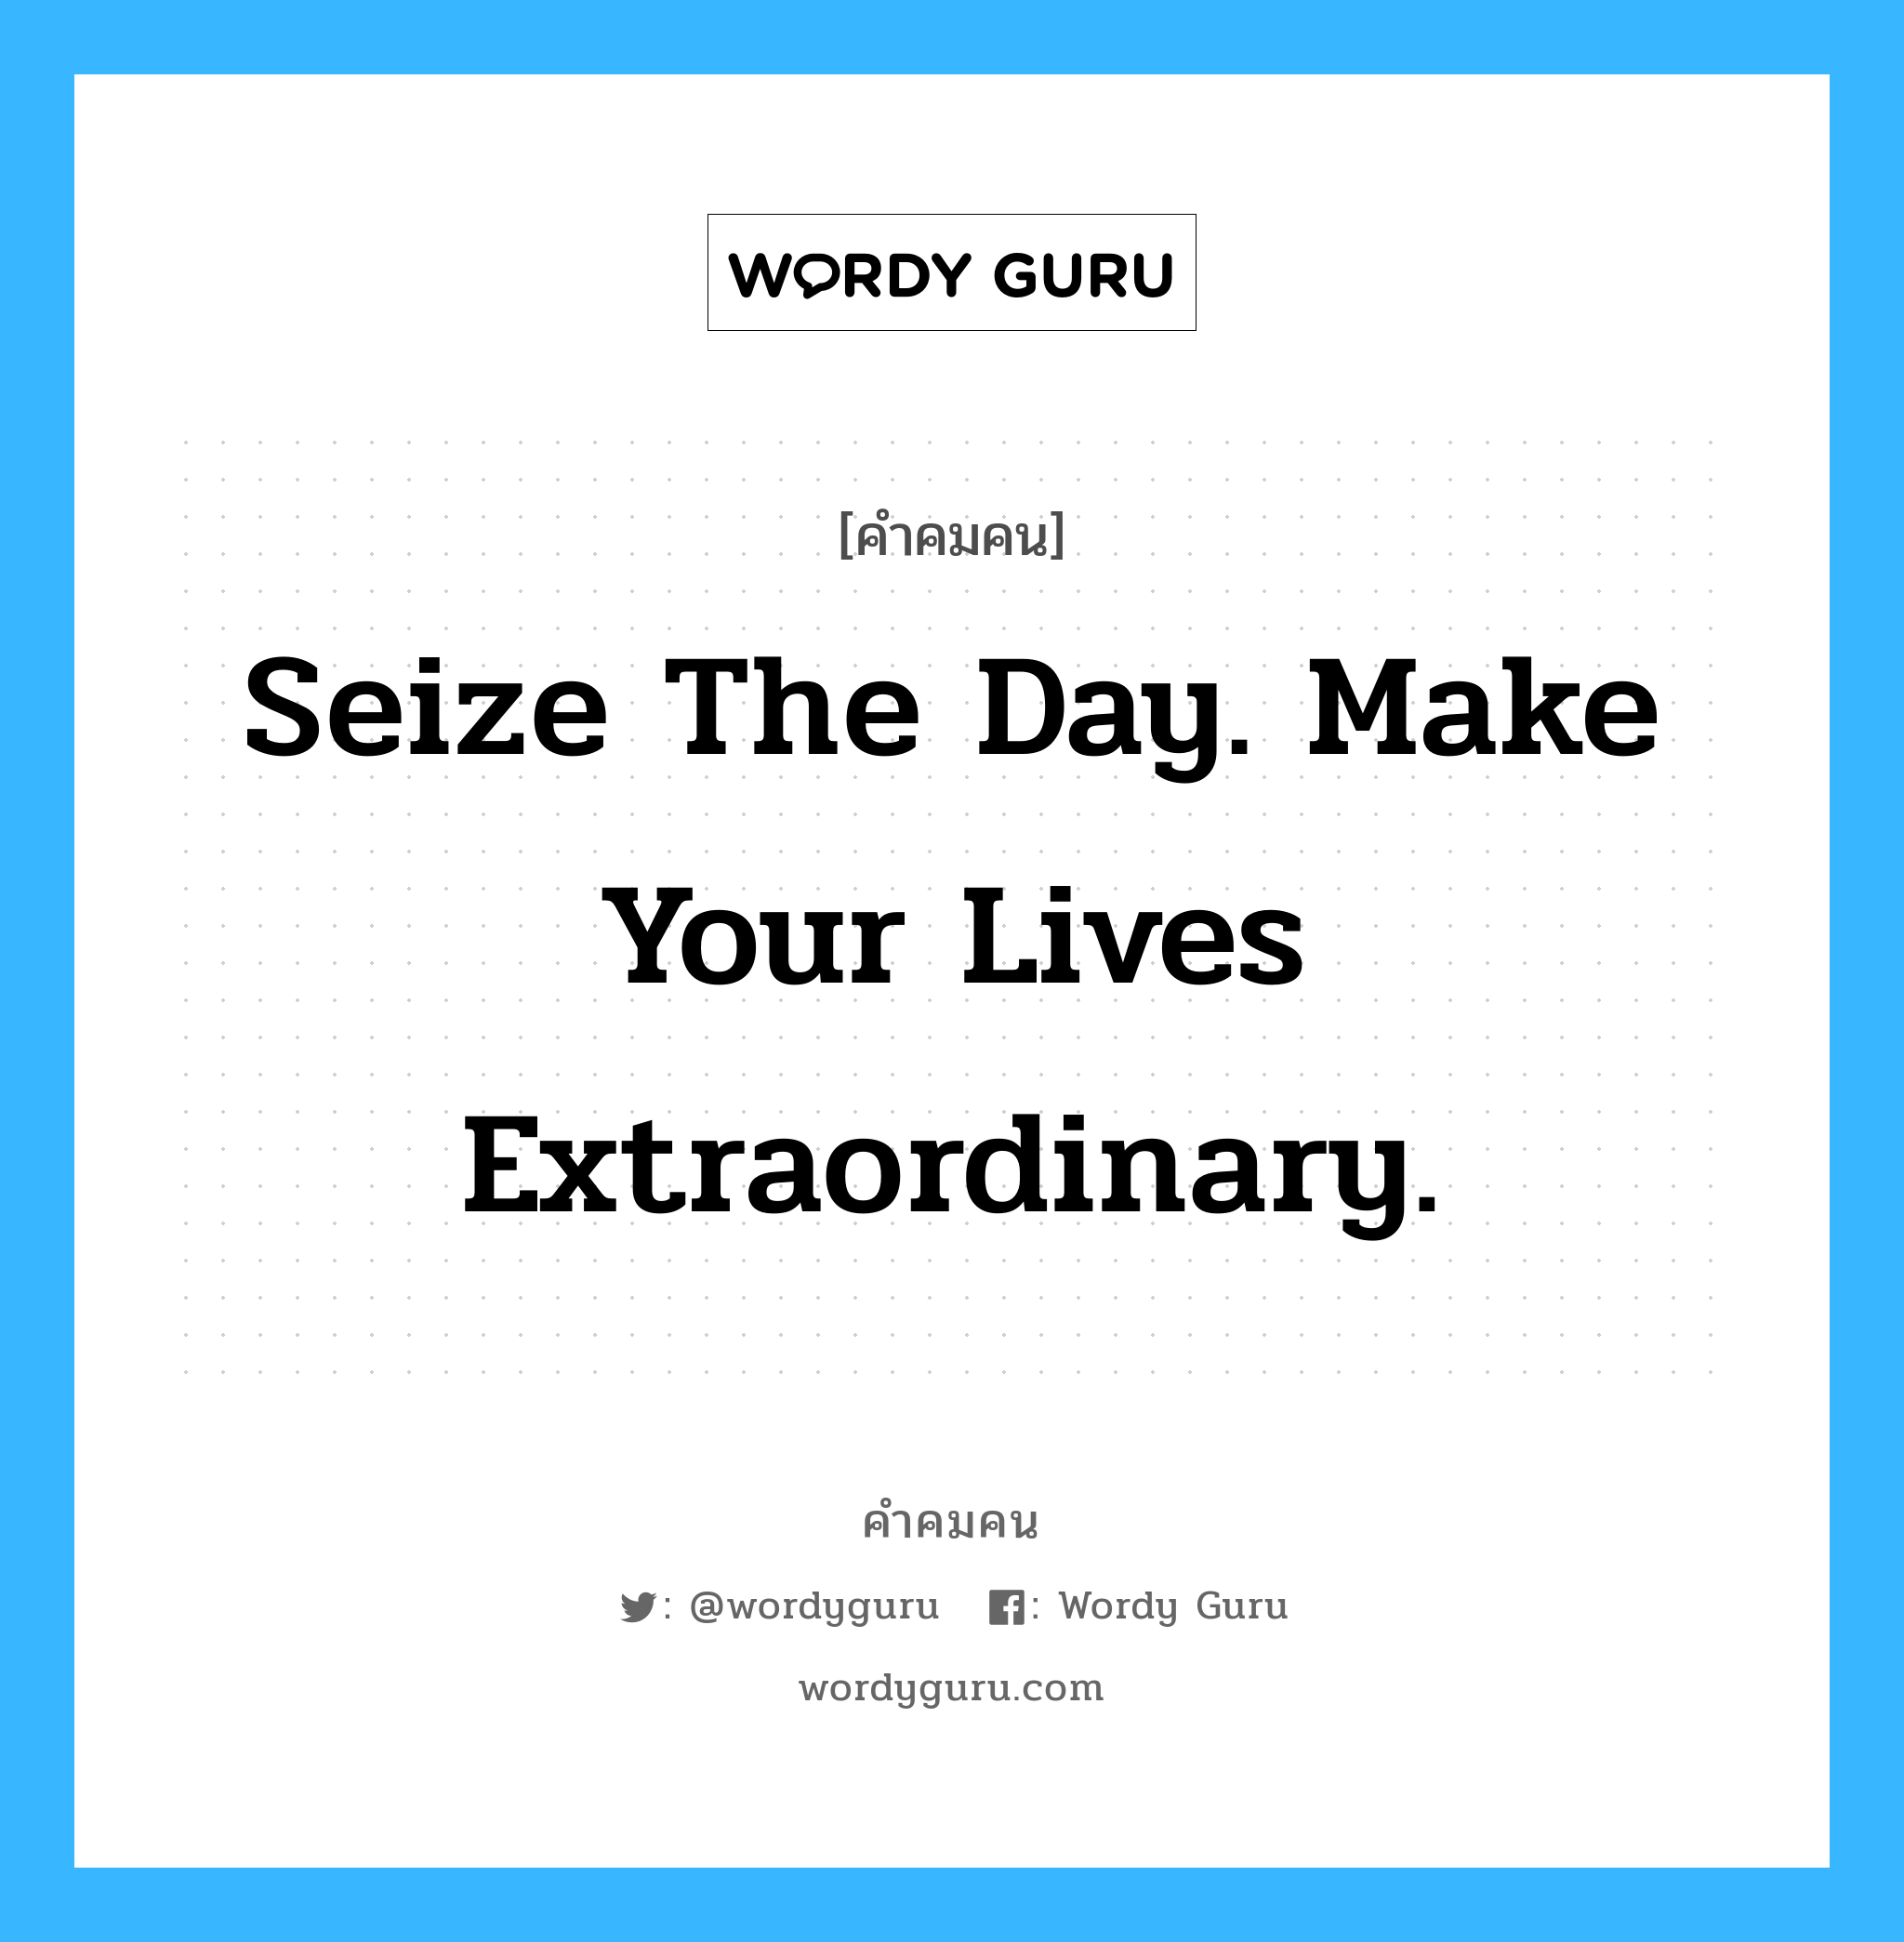 Seize the day. Make your lives extraordinary., คำคมคน Seize the day. Make your lives extraordinary. ทำวันนี้ให้ดีที่สุด แล้วชีวิตคุณจะไม่ธรรมดา From The Dead Poets Society หมวด From The Dead Poets Society